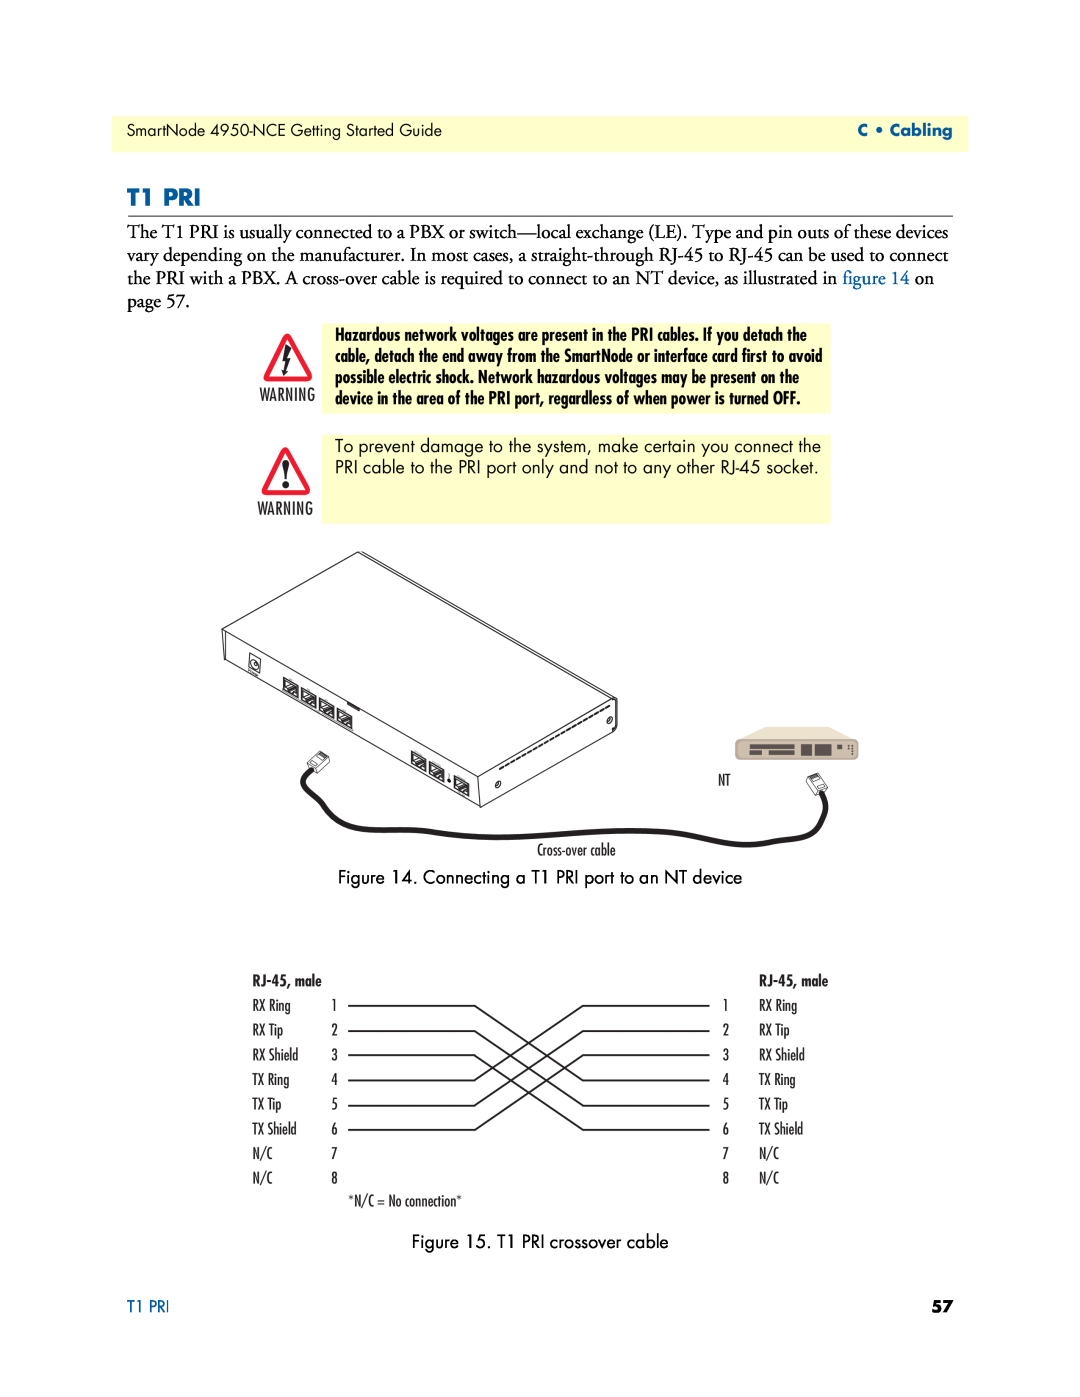 Patton electronic 4950-NCE manual Connecting a T1 PRI port to an NT device, T1 PRI crossover cable, C Cabling 